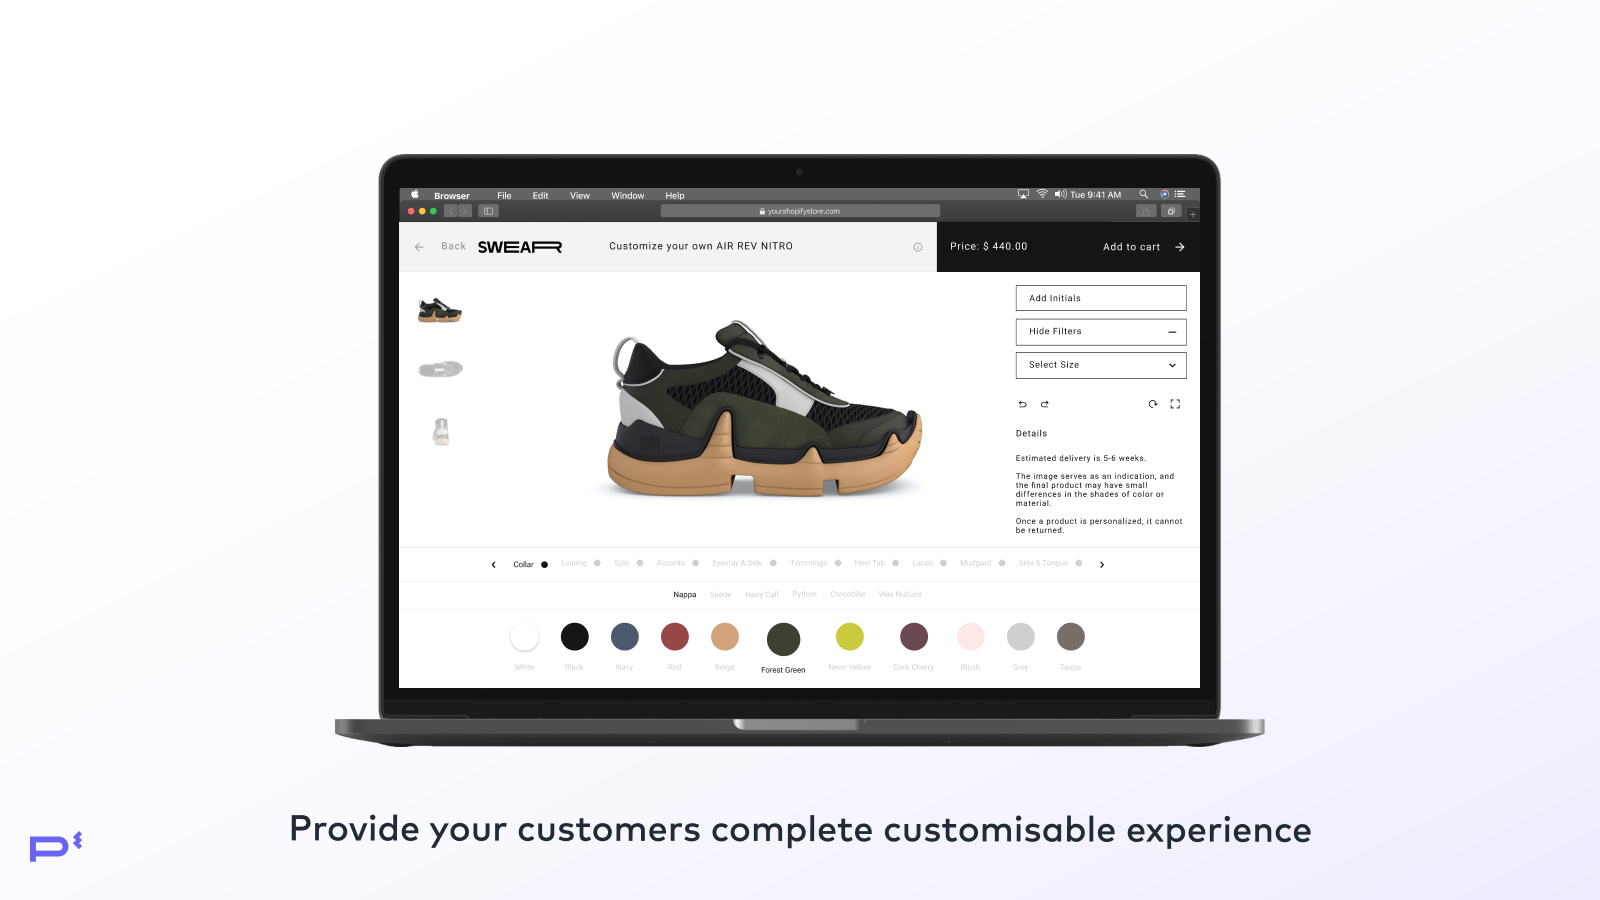 Customers Customisable Experience